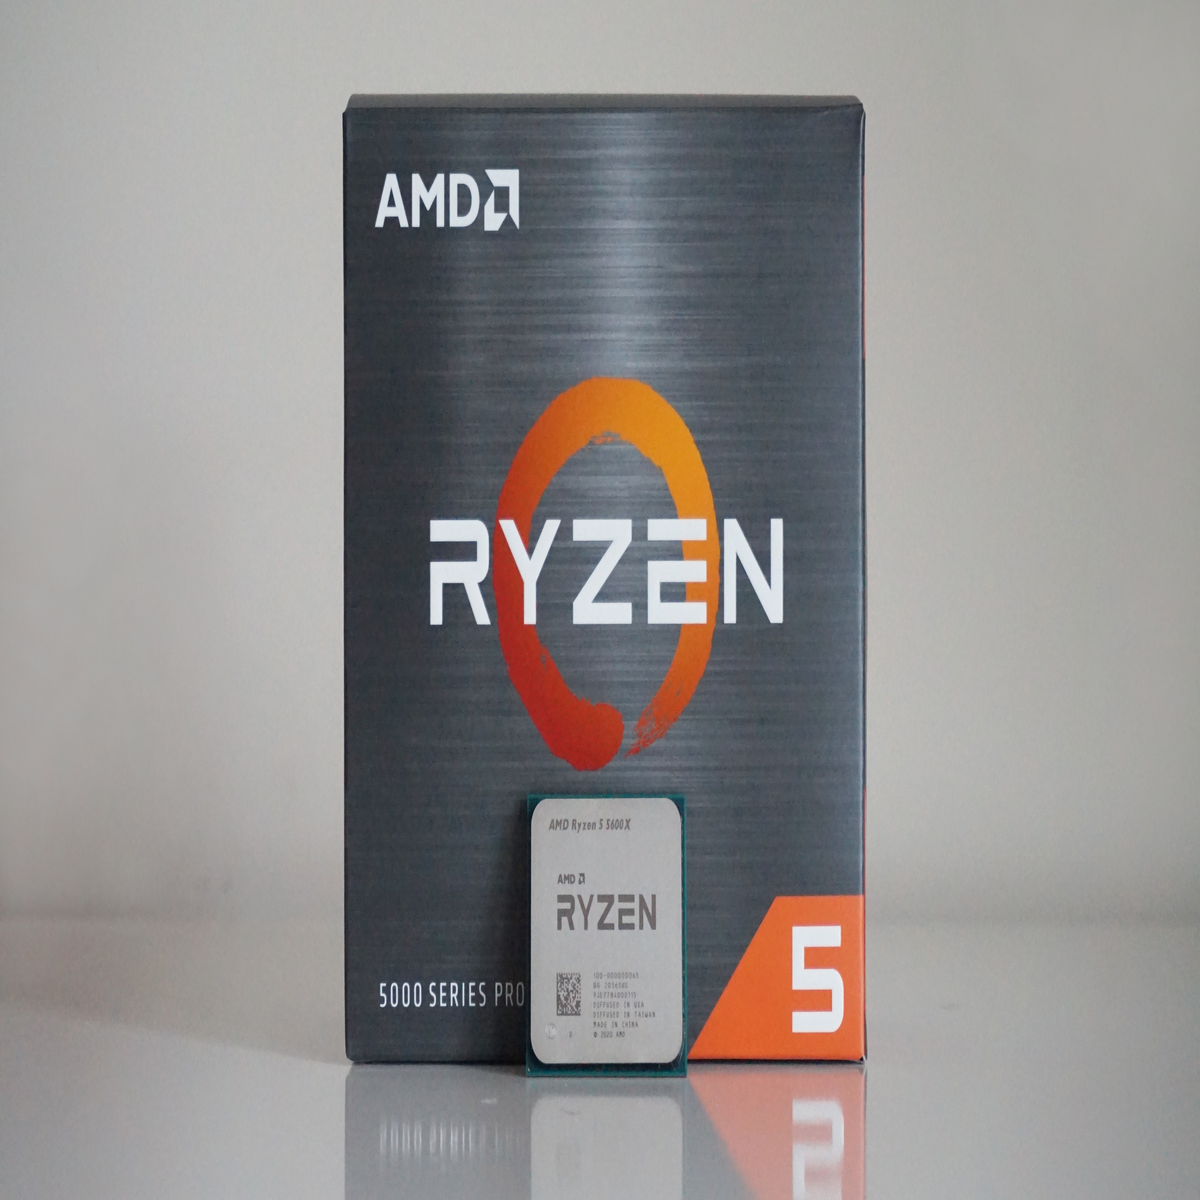 The Ryzen 5600 is much better value than the 5600X - especially